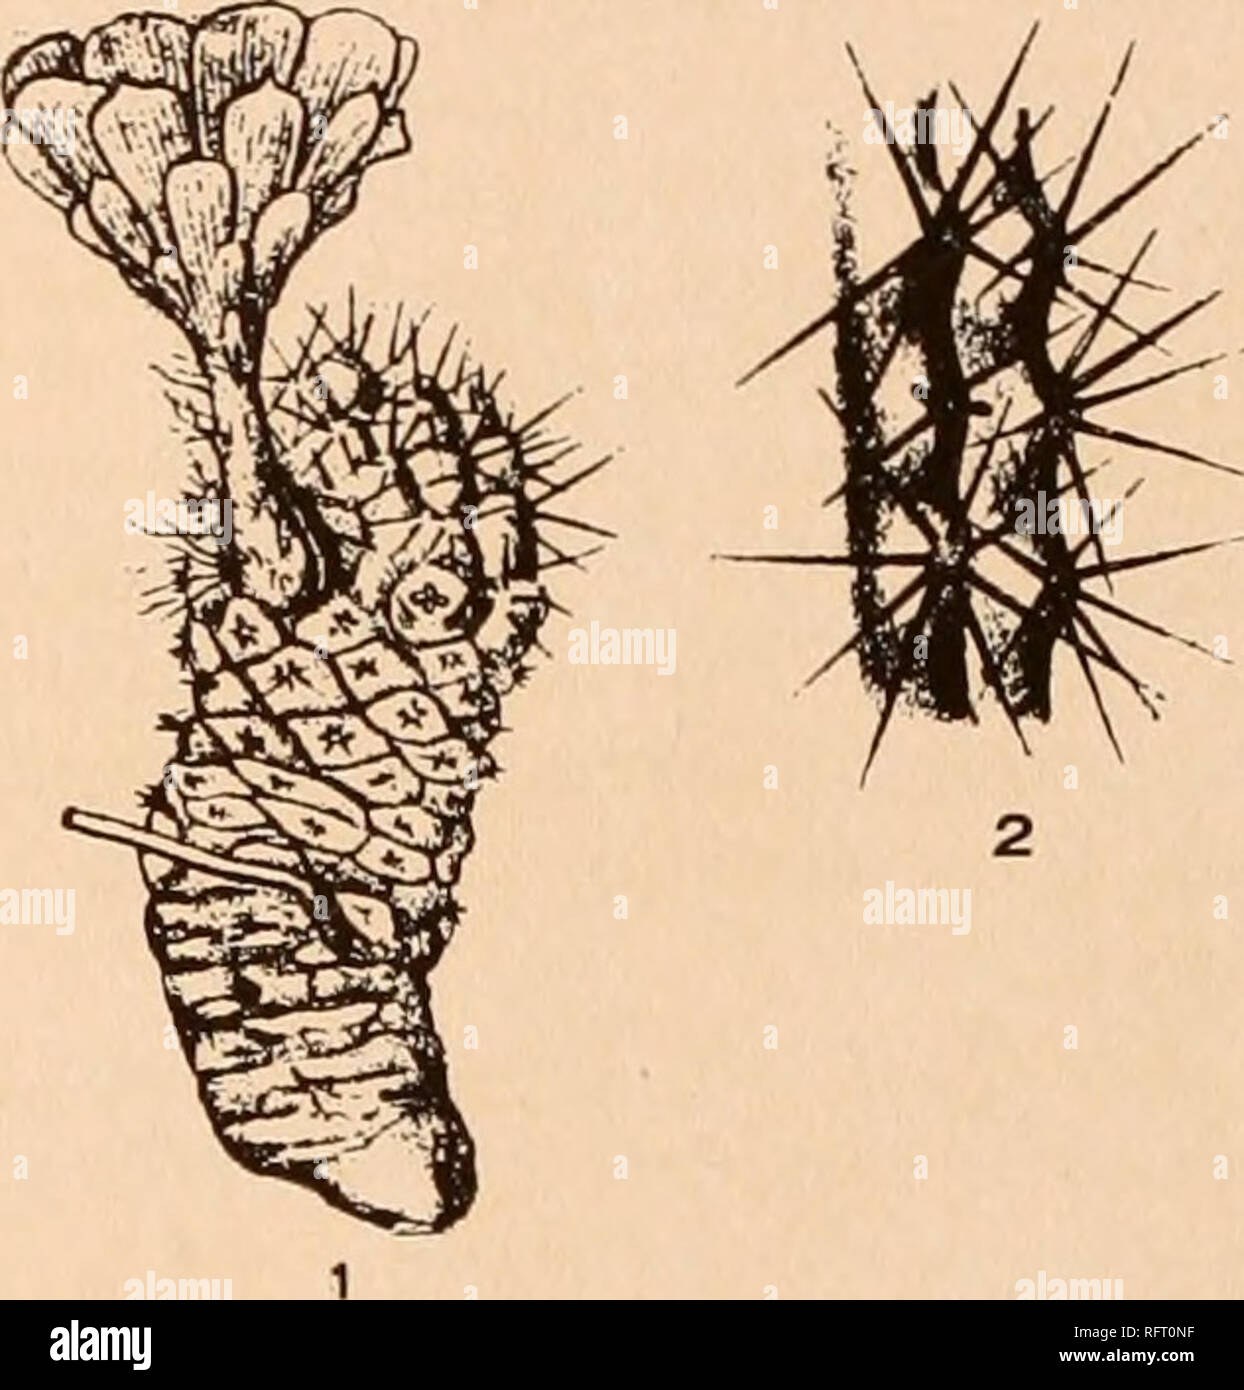 . Carnegie Institution of Washington publication. . Fig. 60.—Rebutia pygmaea. Fig. 60 a.—Plant and section of stem of Rebutia steinmannii. 4. Rebutia pygmaea (R. E. Fries). Echinopsis pygmaea R. E. Fries, Nov. Act. Soc. Sci. Upsal. IV. I1: 120. 1905. Simple, ovoid to short-cylindric, 1 to 3 cm. long, 1.2 to 2 cm. in diameter, or sometimes branched with 2 to many short joints from a much thickened root; tubercles small, more or less arranged into 8 to 12 spiraled rows; areoles narrow, somewhat lanate; spines all radial, 9 to 11, short, appressed, 2 to 3 mm. long, acicular, somewhat swollen at b Stock Photo